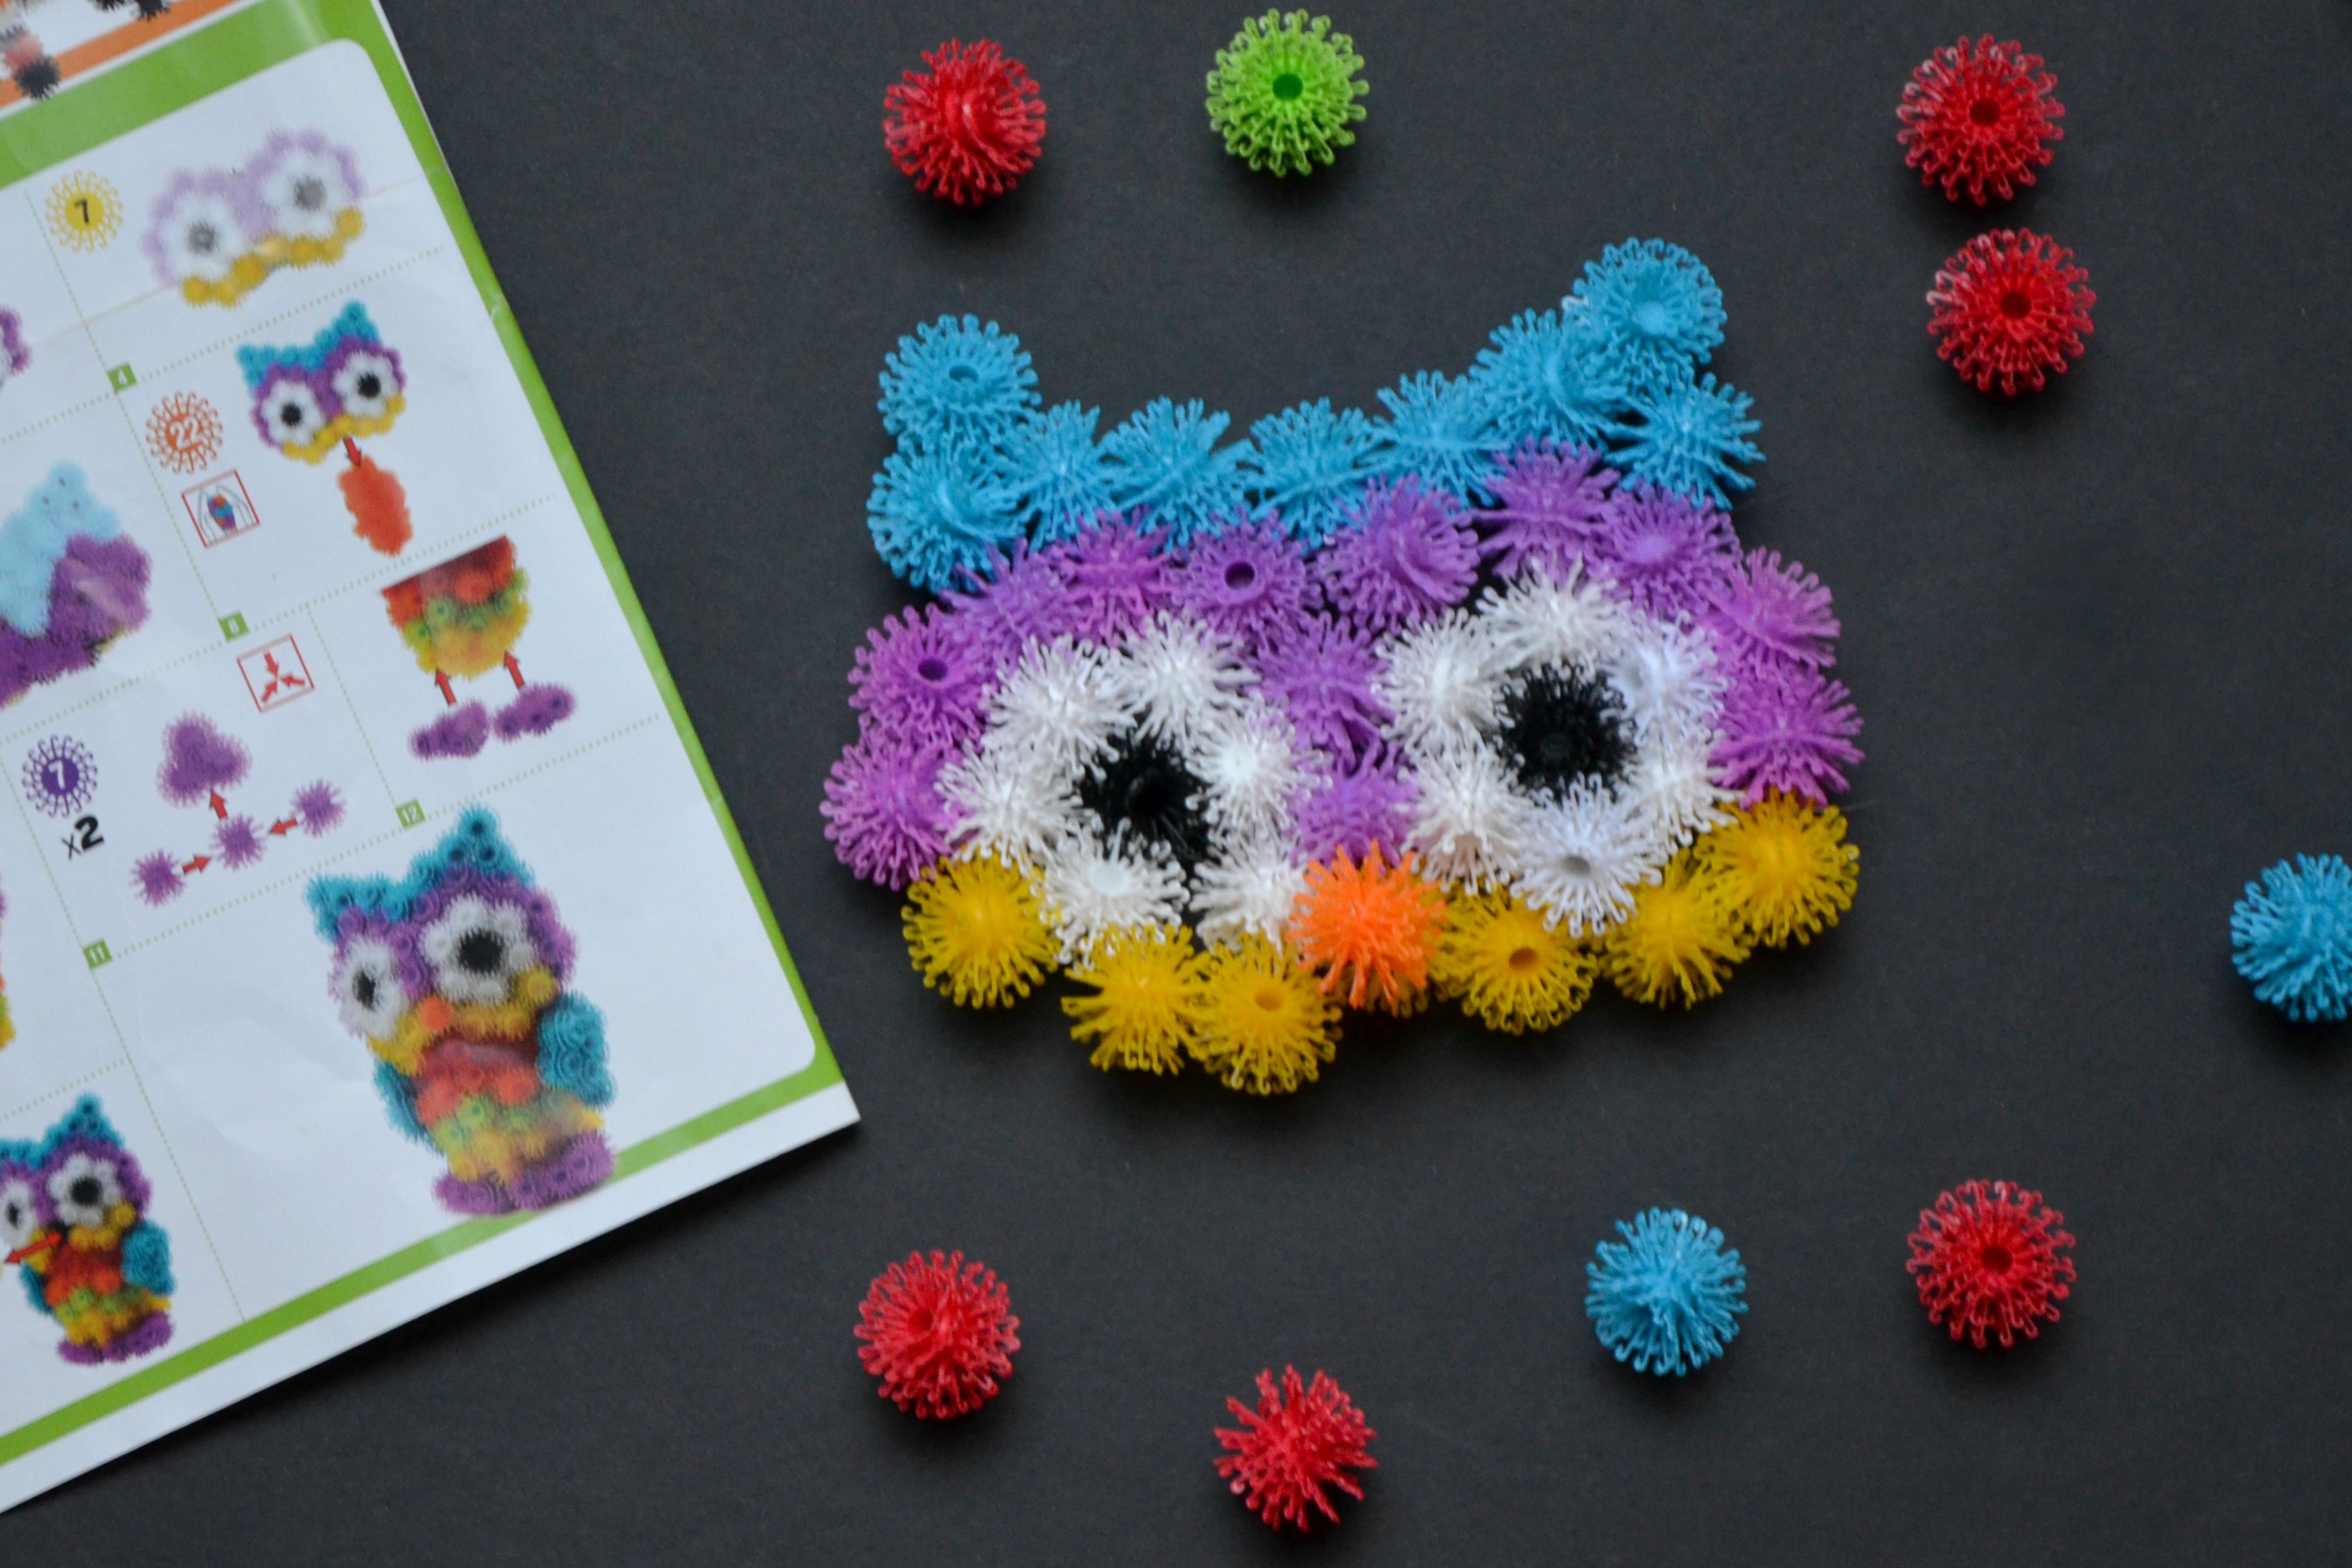 Giggles and Creativity with Bunchems Alive {and Bunchems Alive Giveaway!}